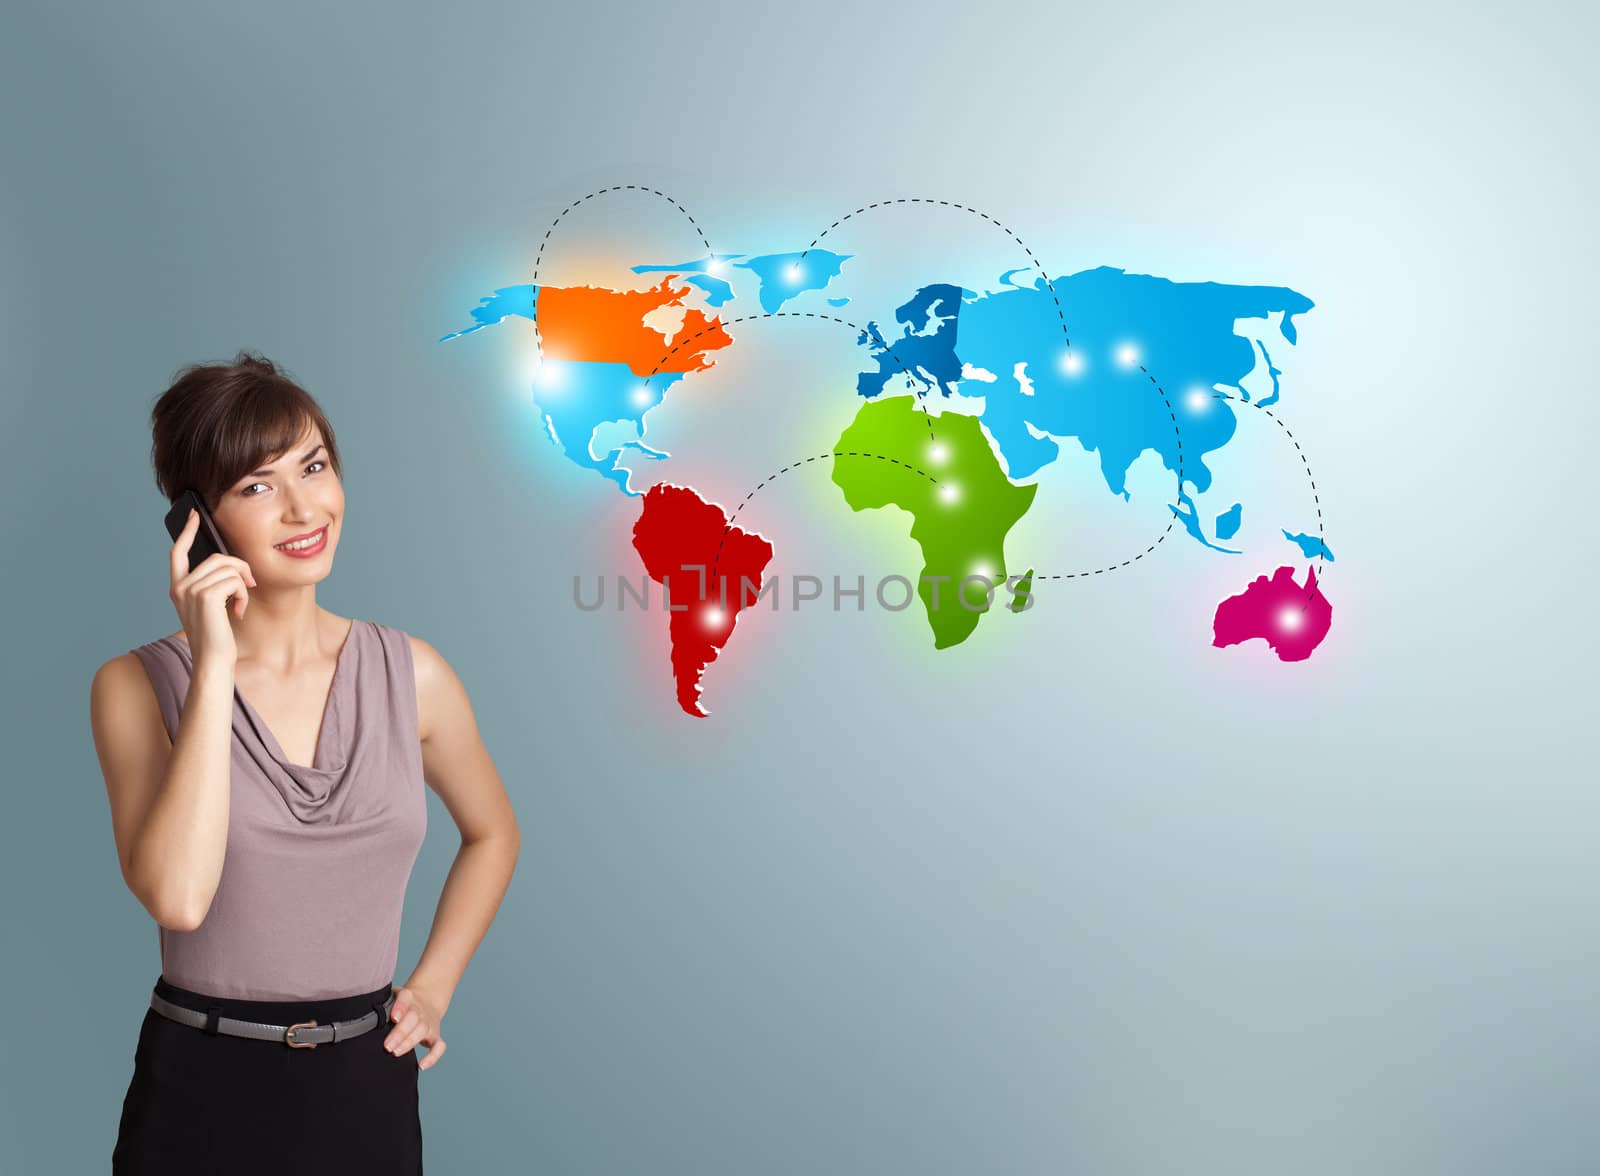 Beautiful young woman making phone call with colorful world map